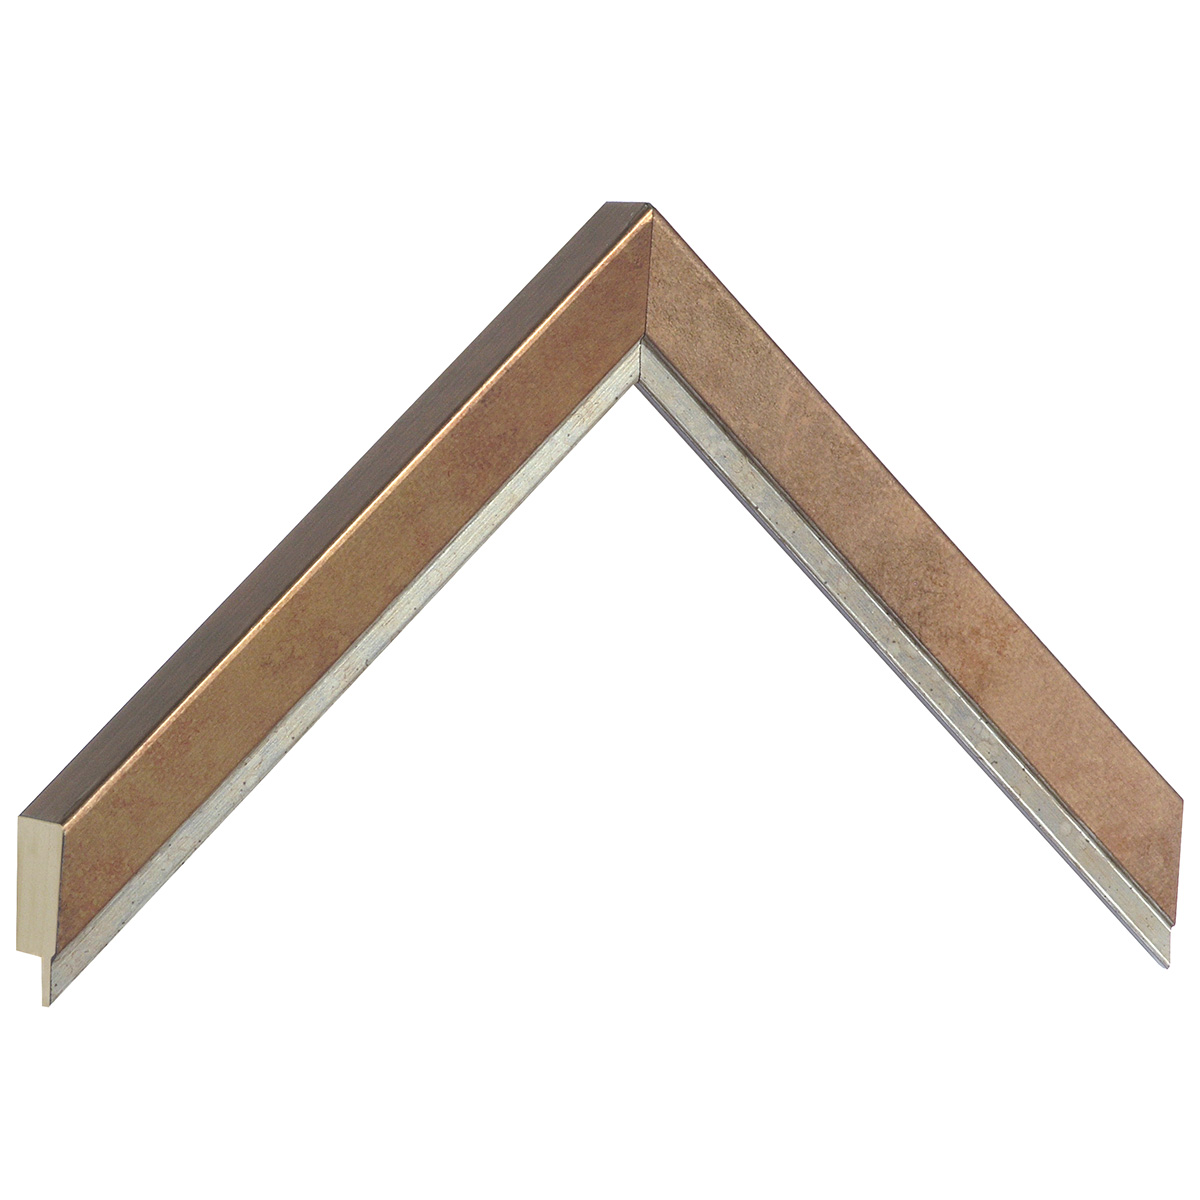 Moulding finger-jointed pine, width 22mm, height 35 - Copper - Sample